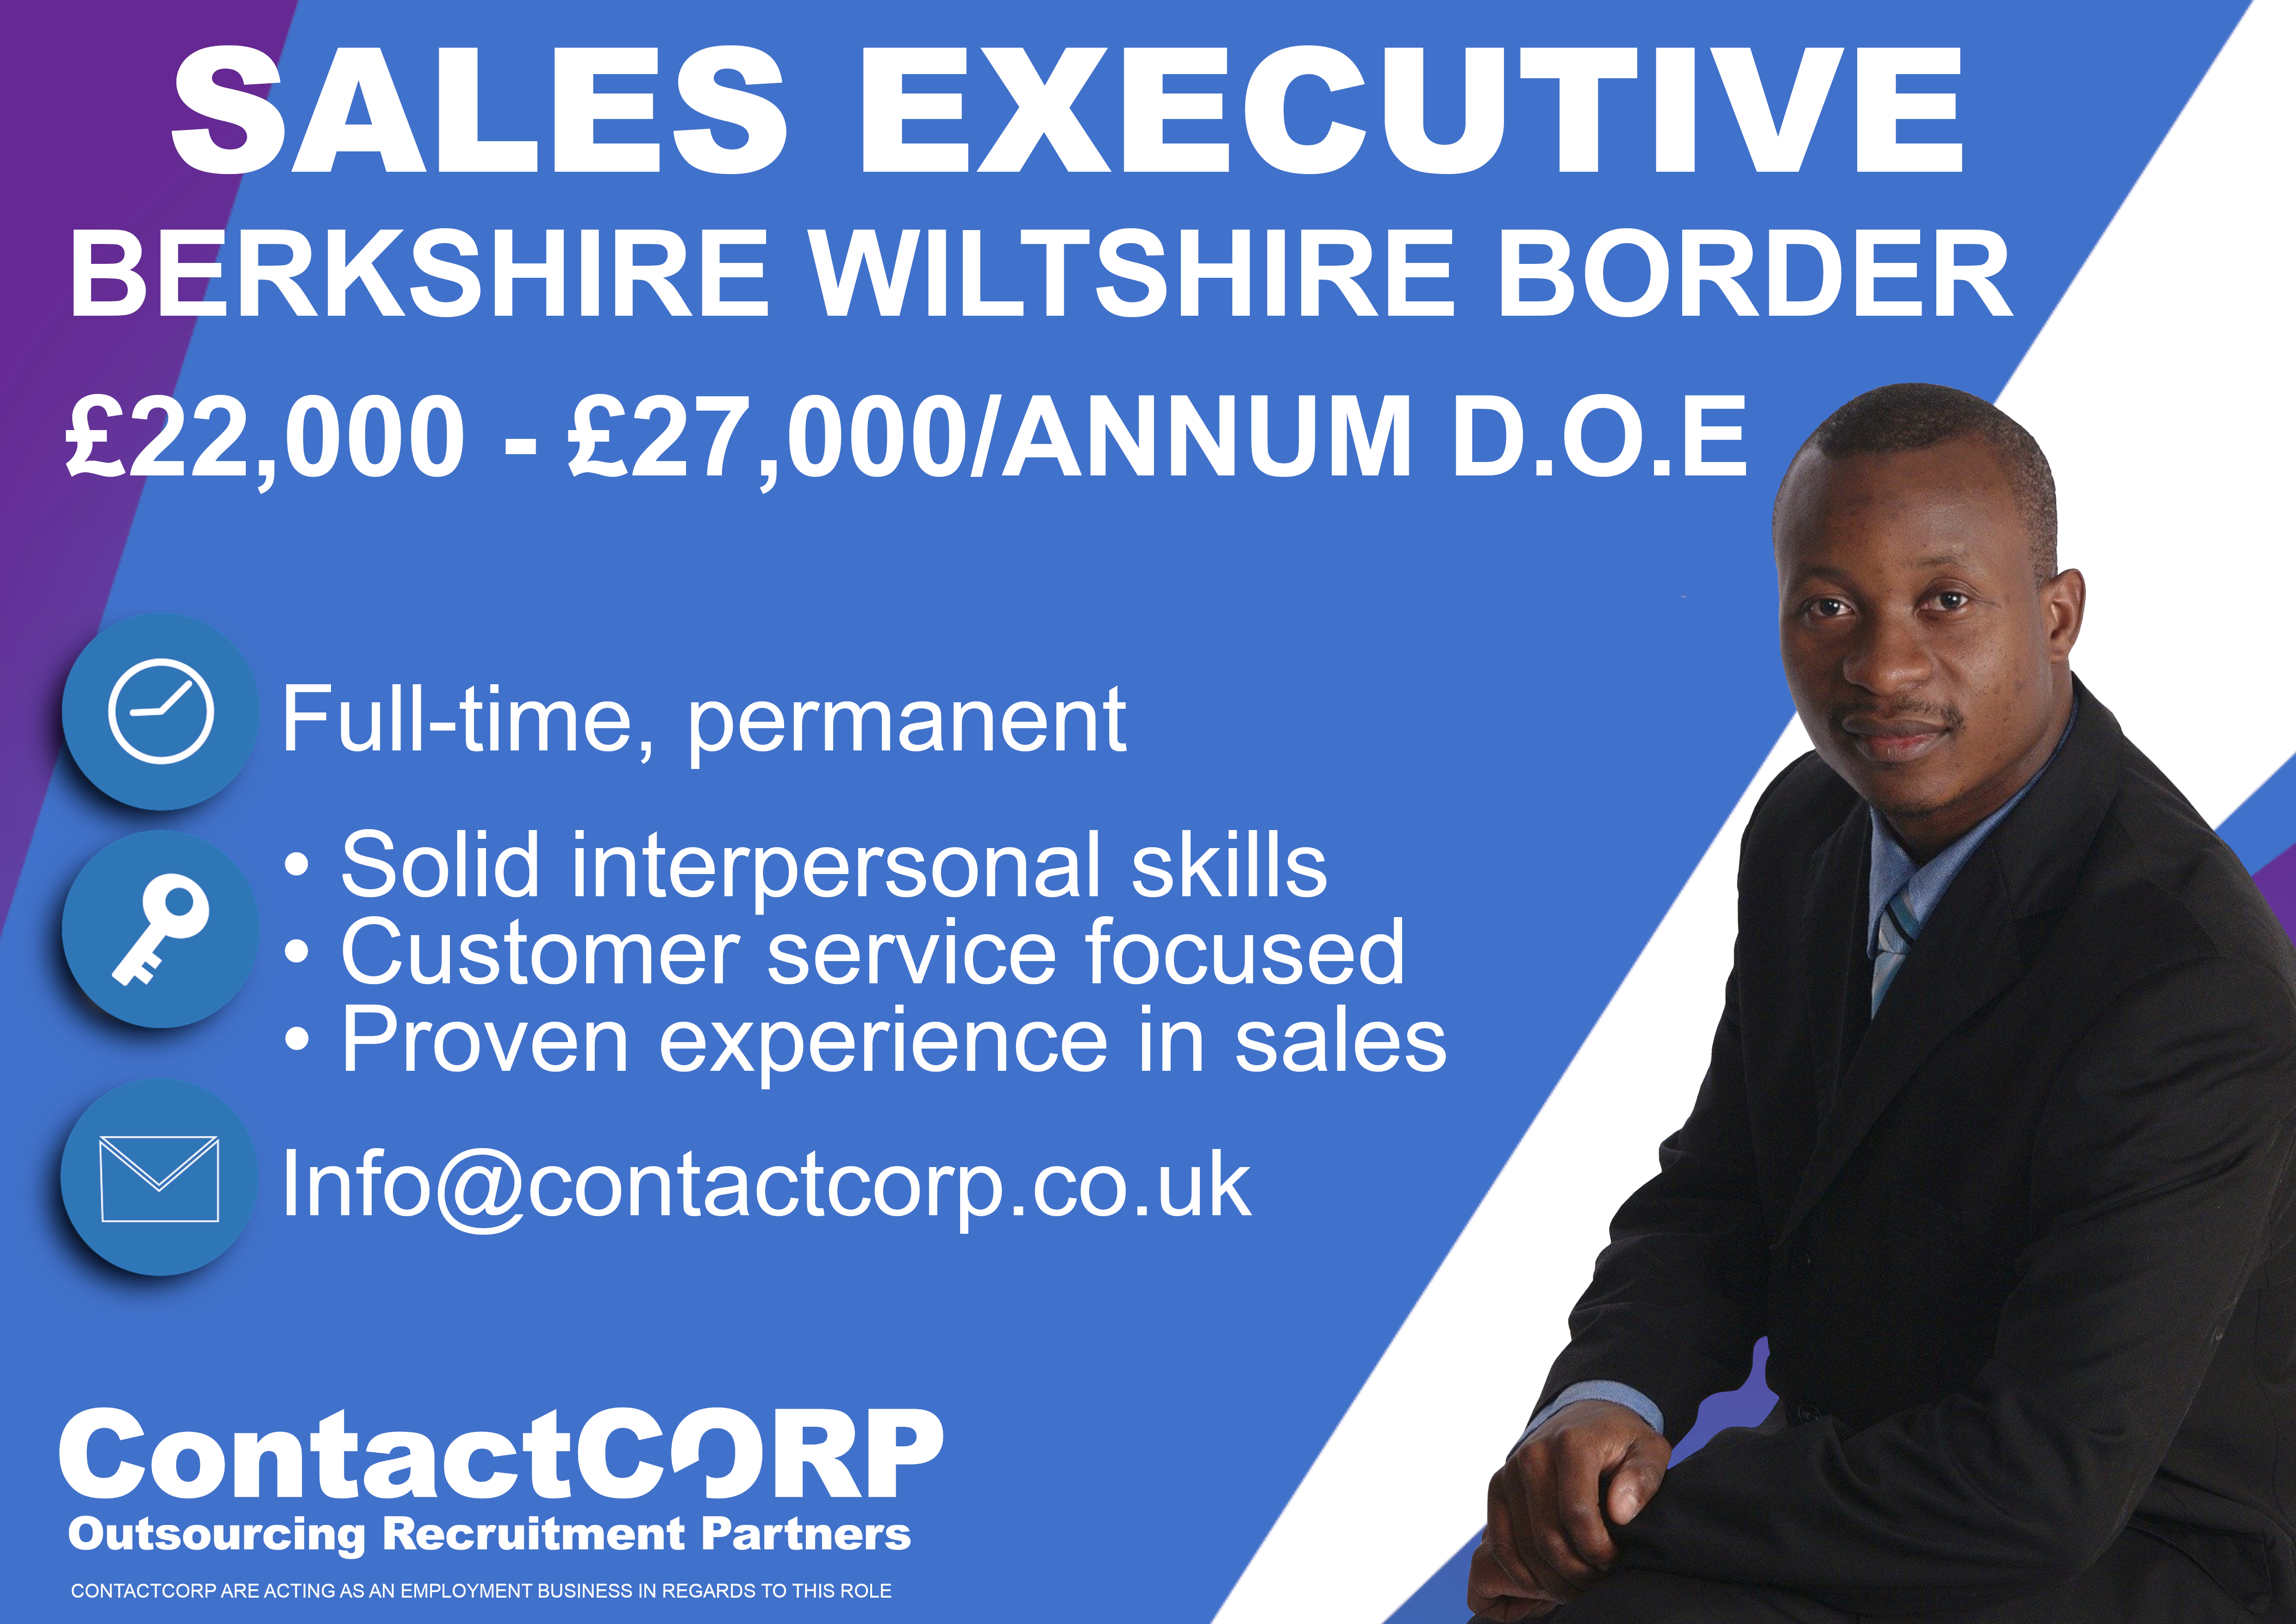 salesman in suit with a blue background and sales executive job description